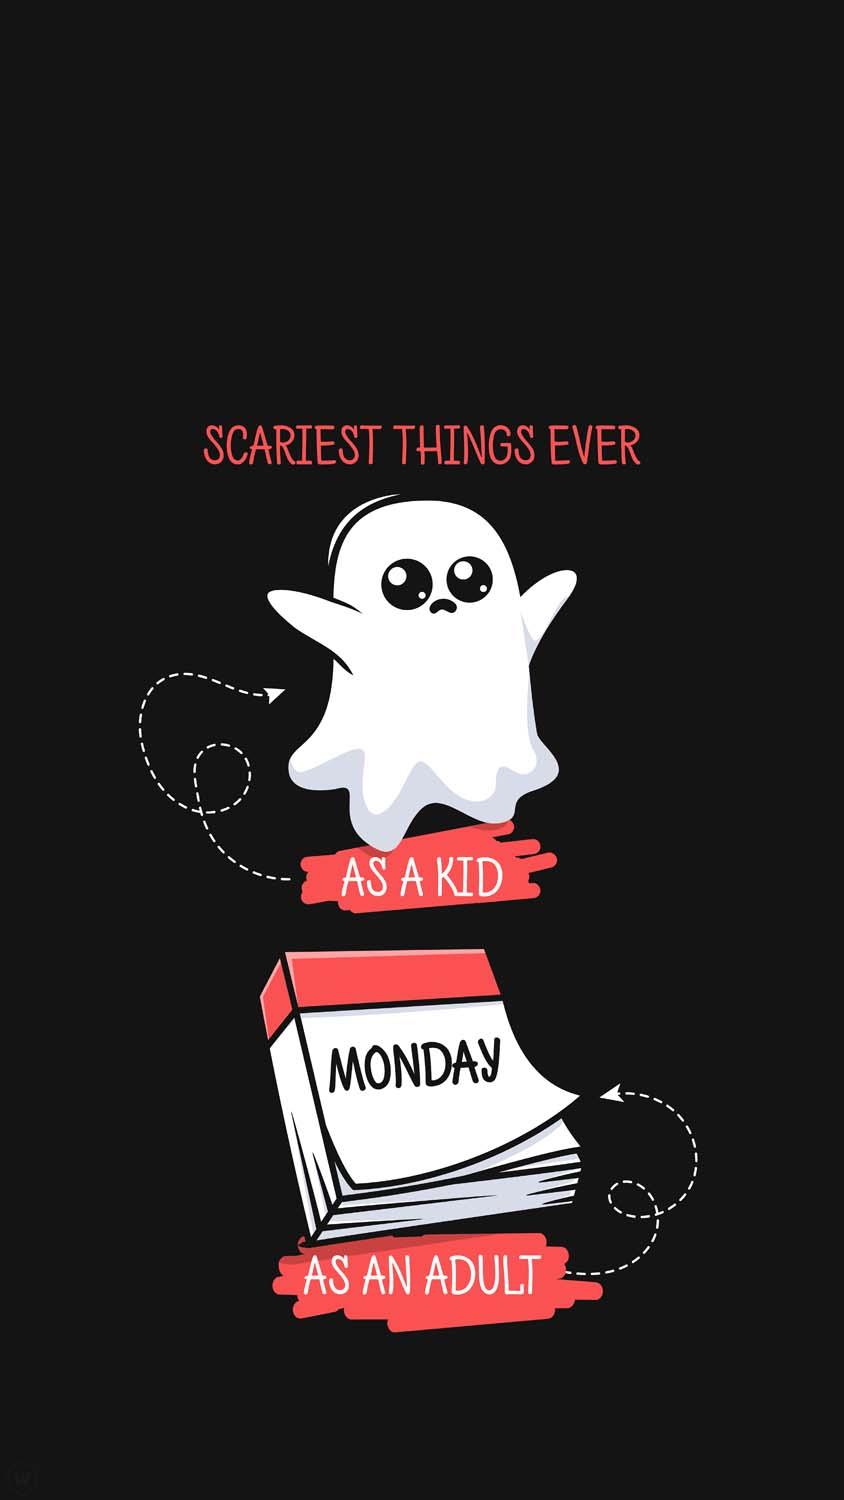 Scariest Things Ever IPhone Wallpaper HD  IPhone Wallpapers